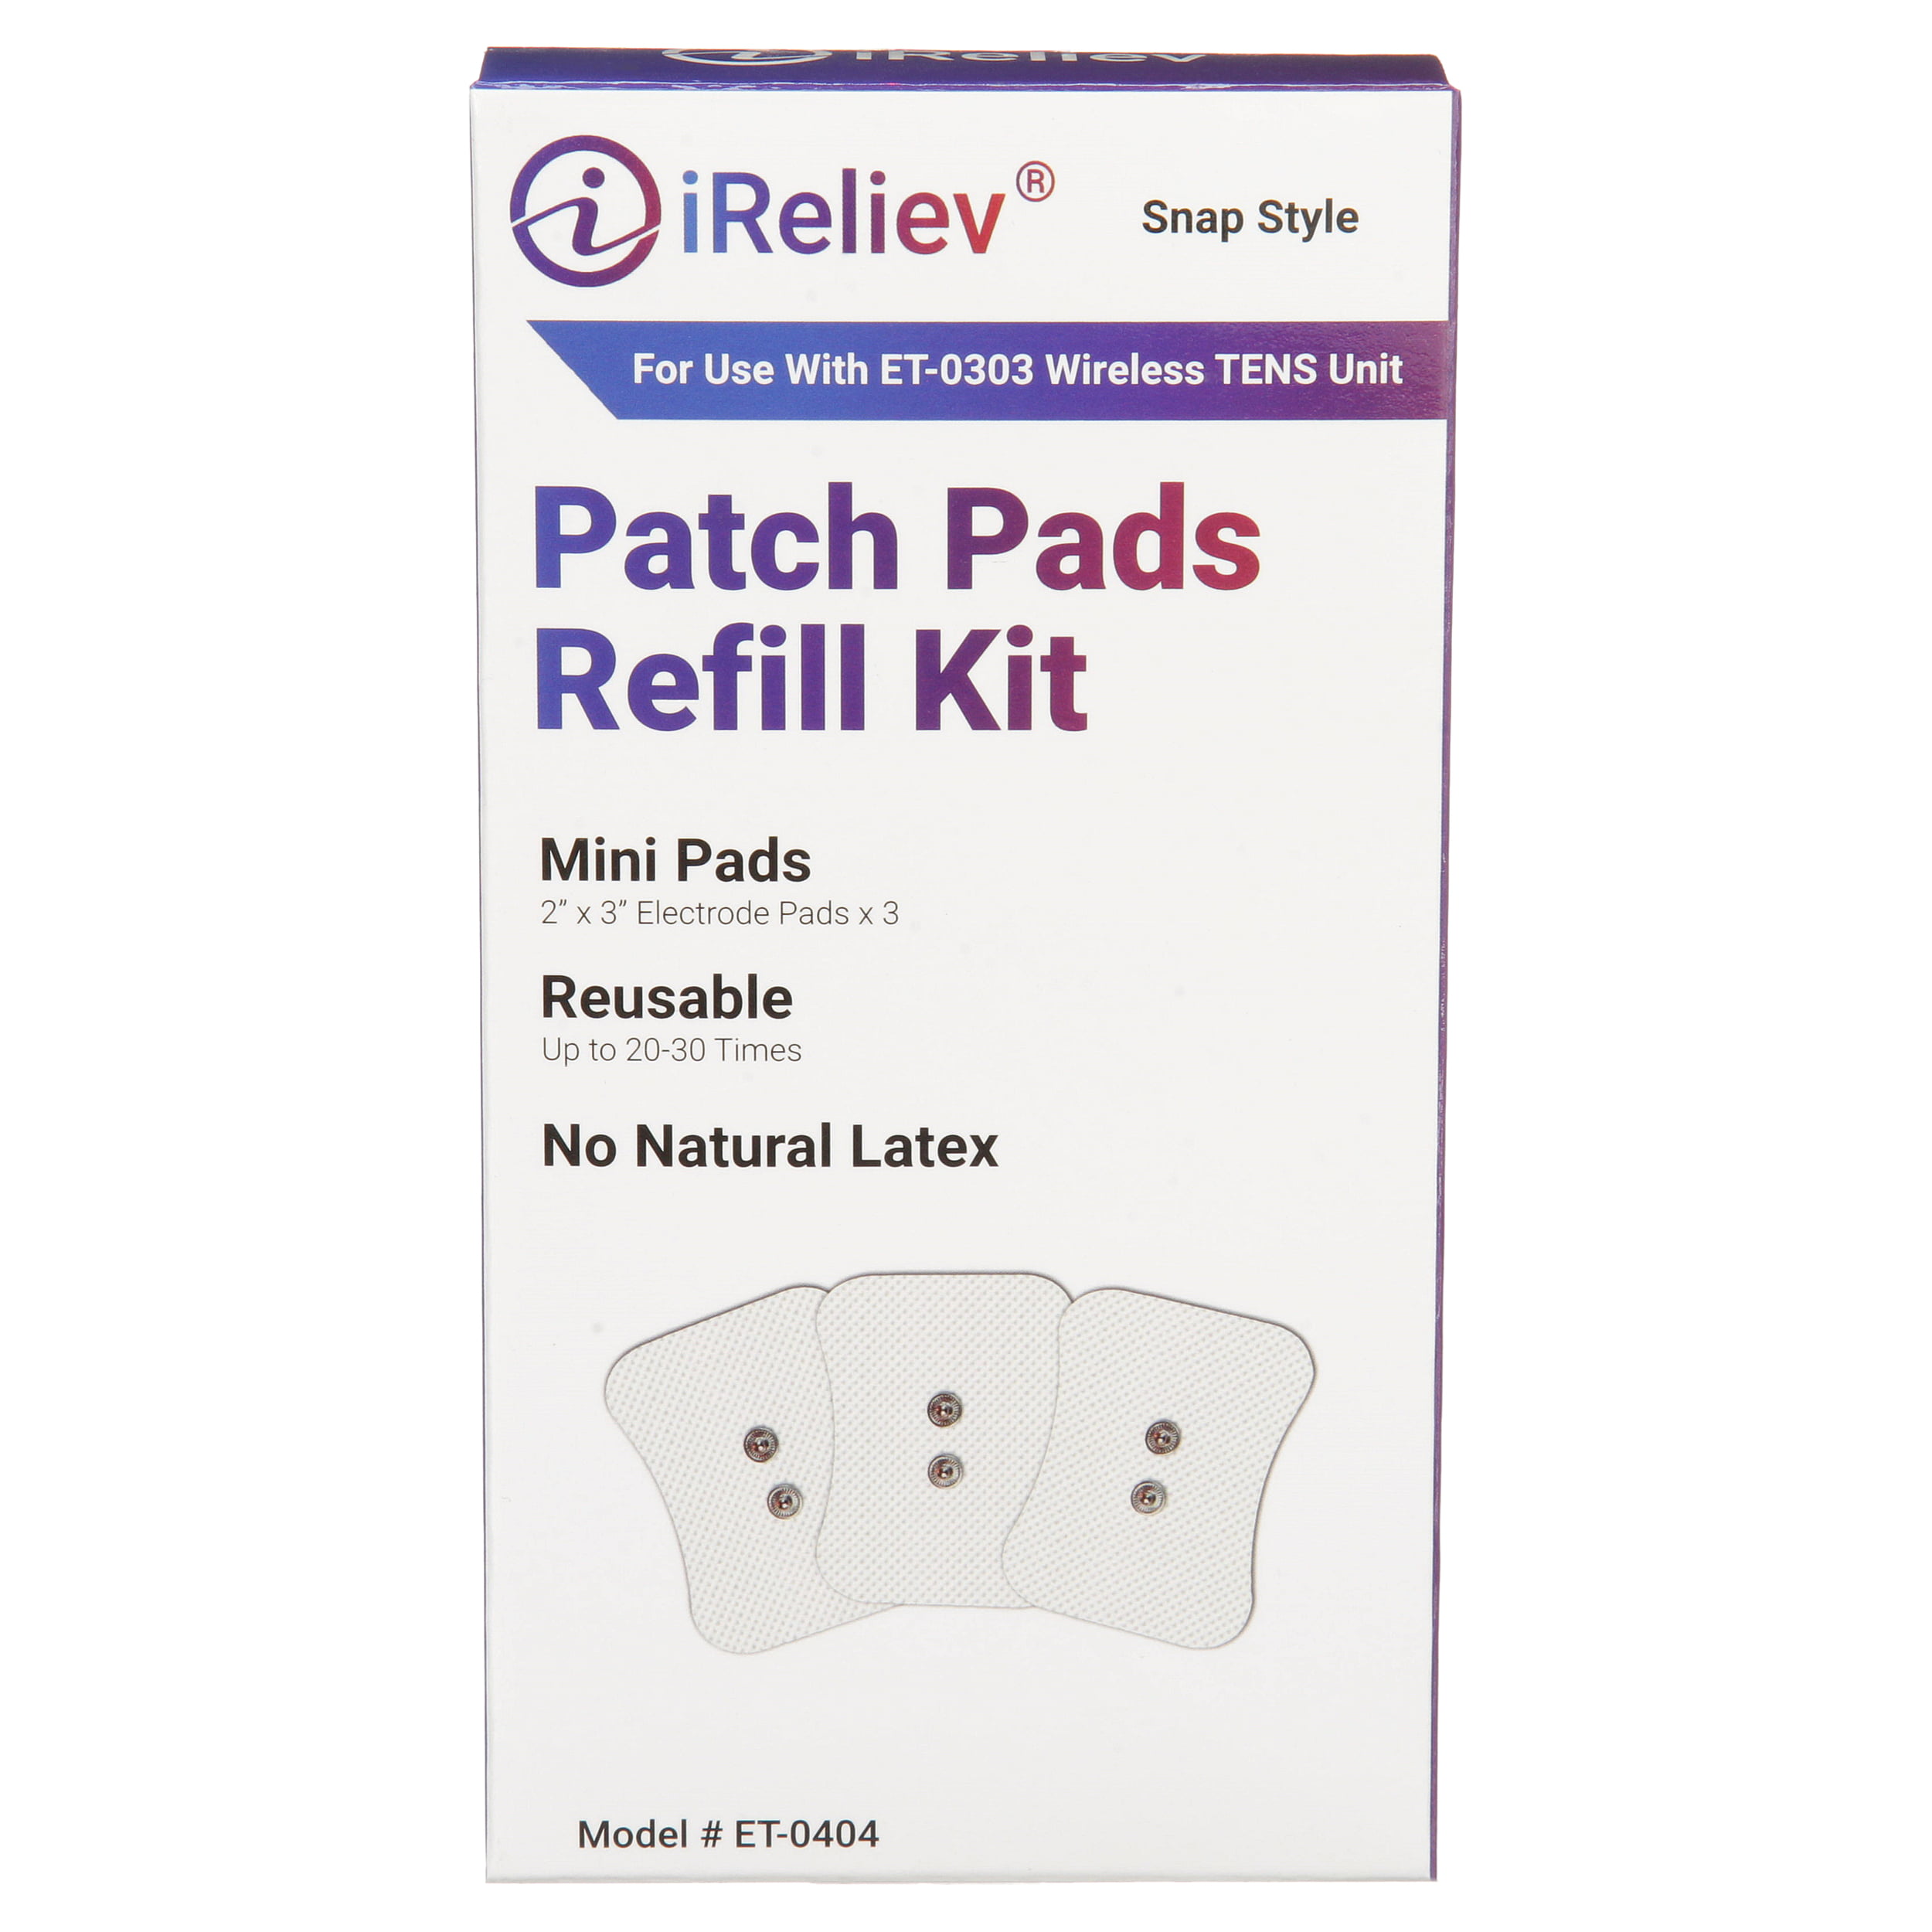 Ireliev Pain Relief Patch, Mini Wireless Tens Unit, Bedroom Safety, Beauty & Health